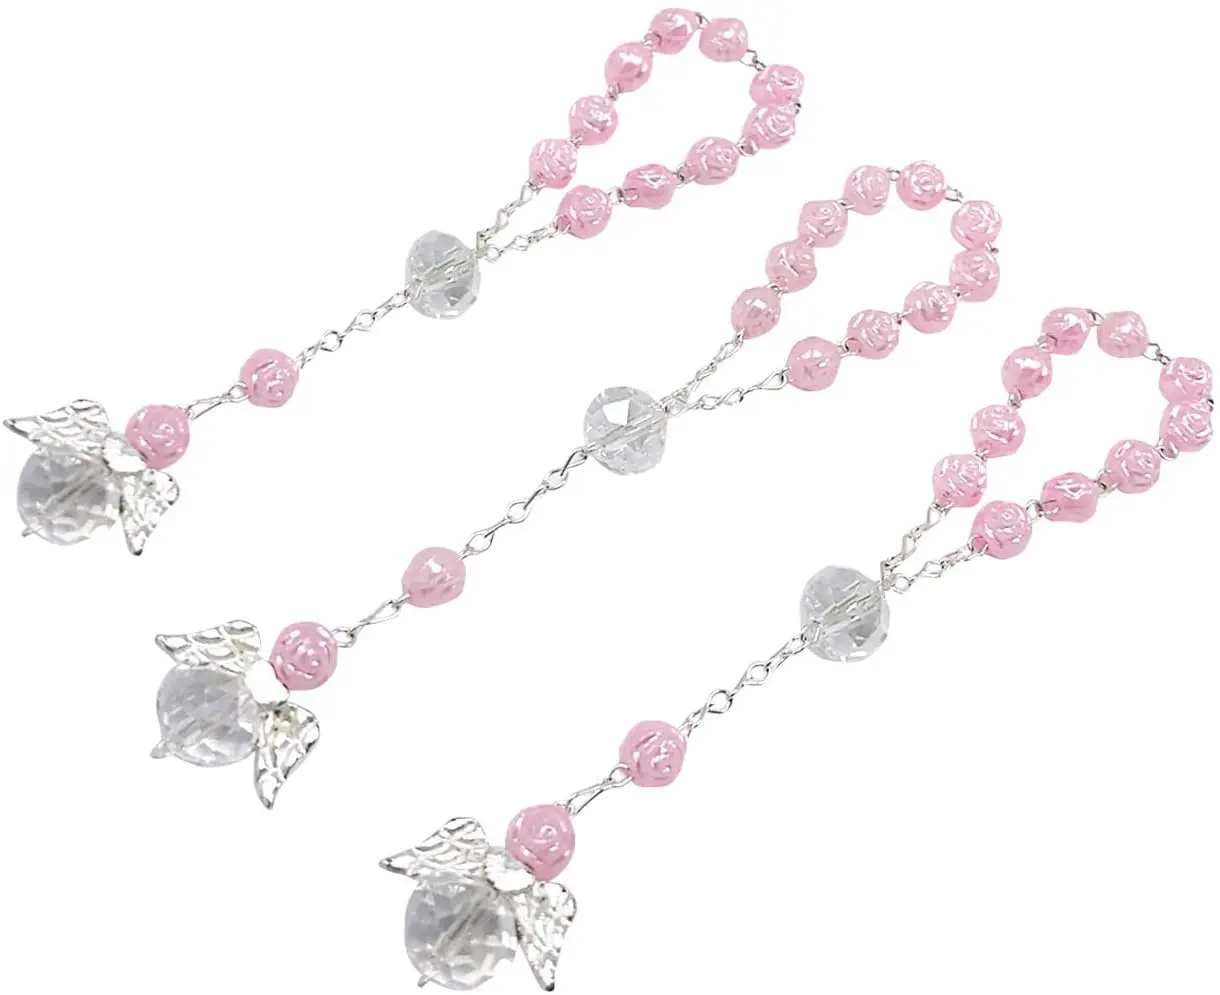 12 Pcs Light Pink Color Baptism Favors with Angels Mini Rosaries Silver Plated Acrylic BeadsFinger Rosaries Pom Pom Keychain